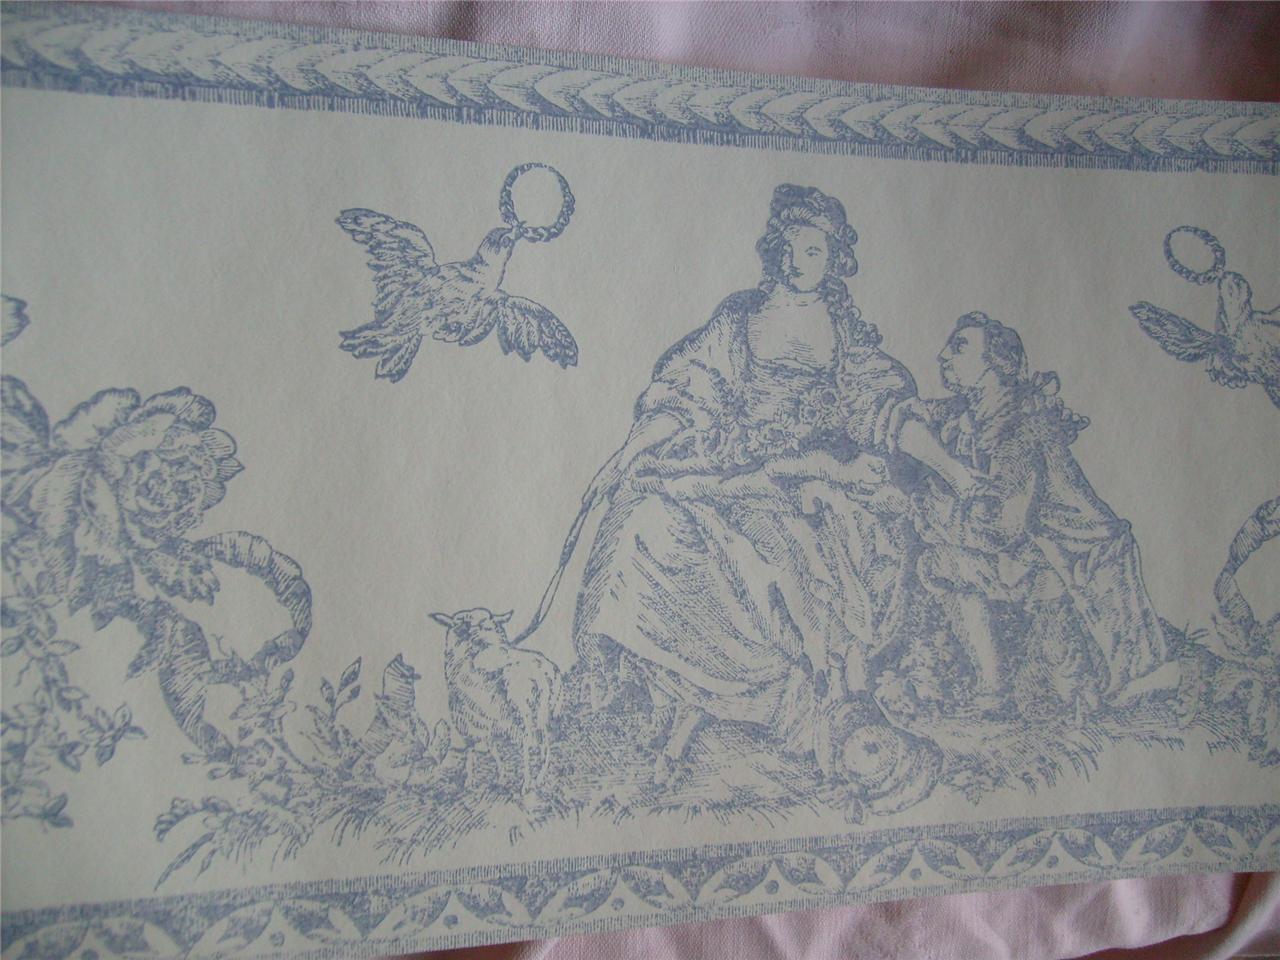 BLUE FRENCH TOILE WILMAN WALLPAPER BORDERS BN 5M ROLLS. Please wait. Image not available. Zoom; Enlarge. Mouse here to zoom in. Please wait